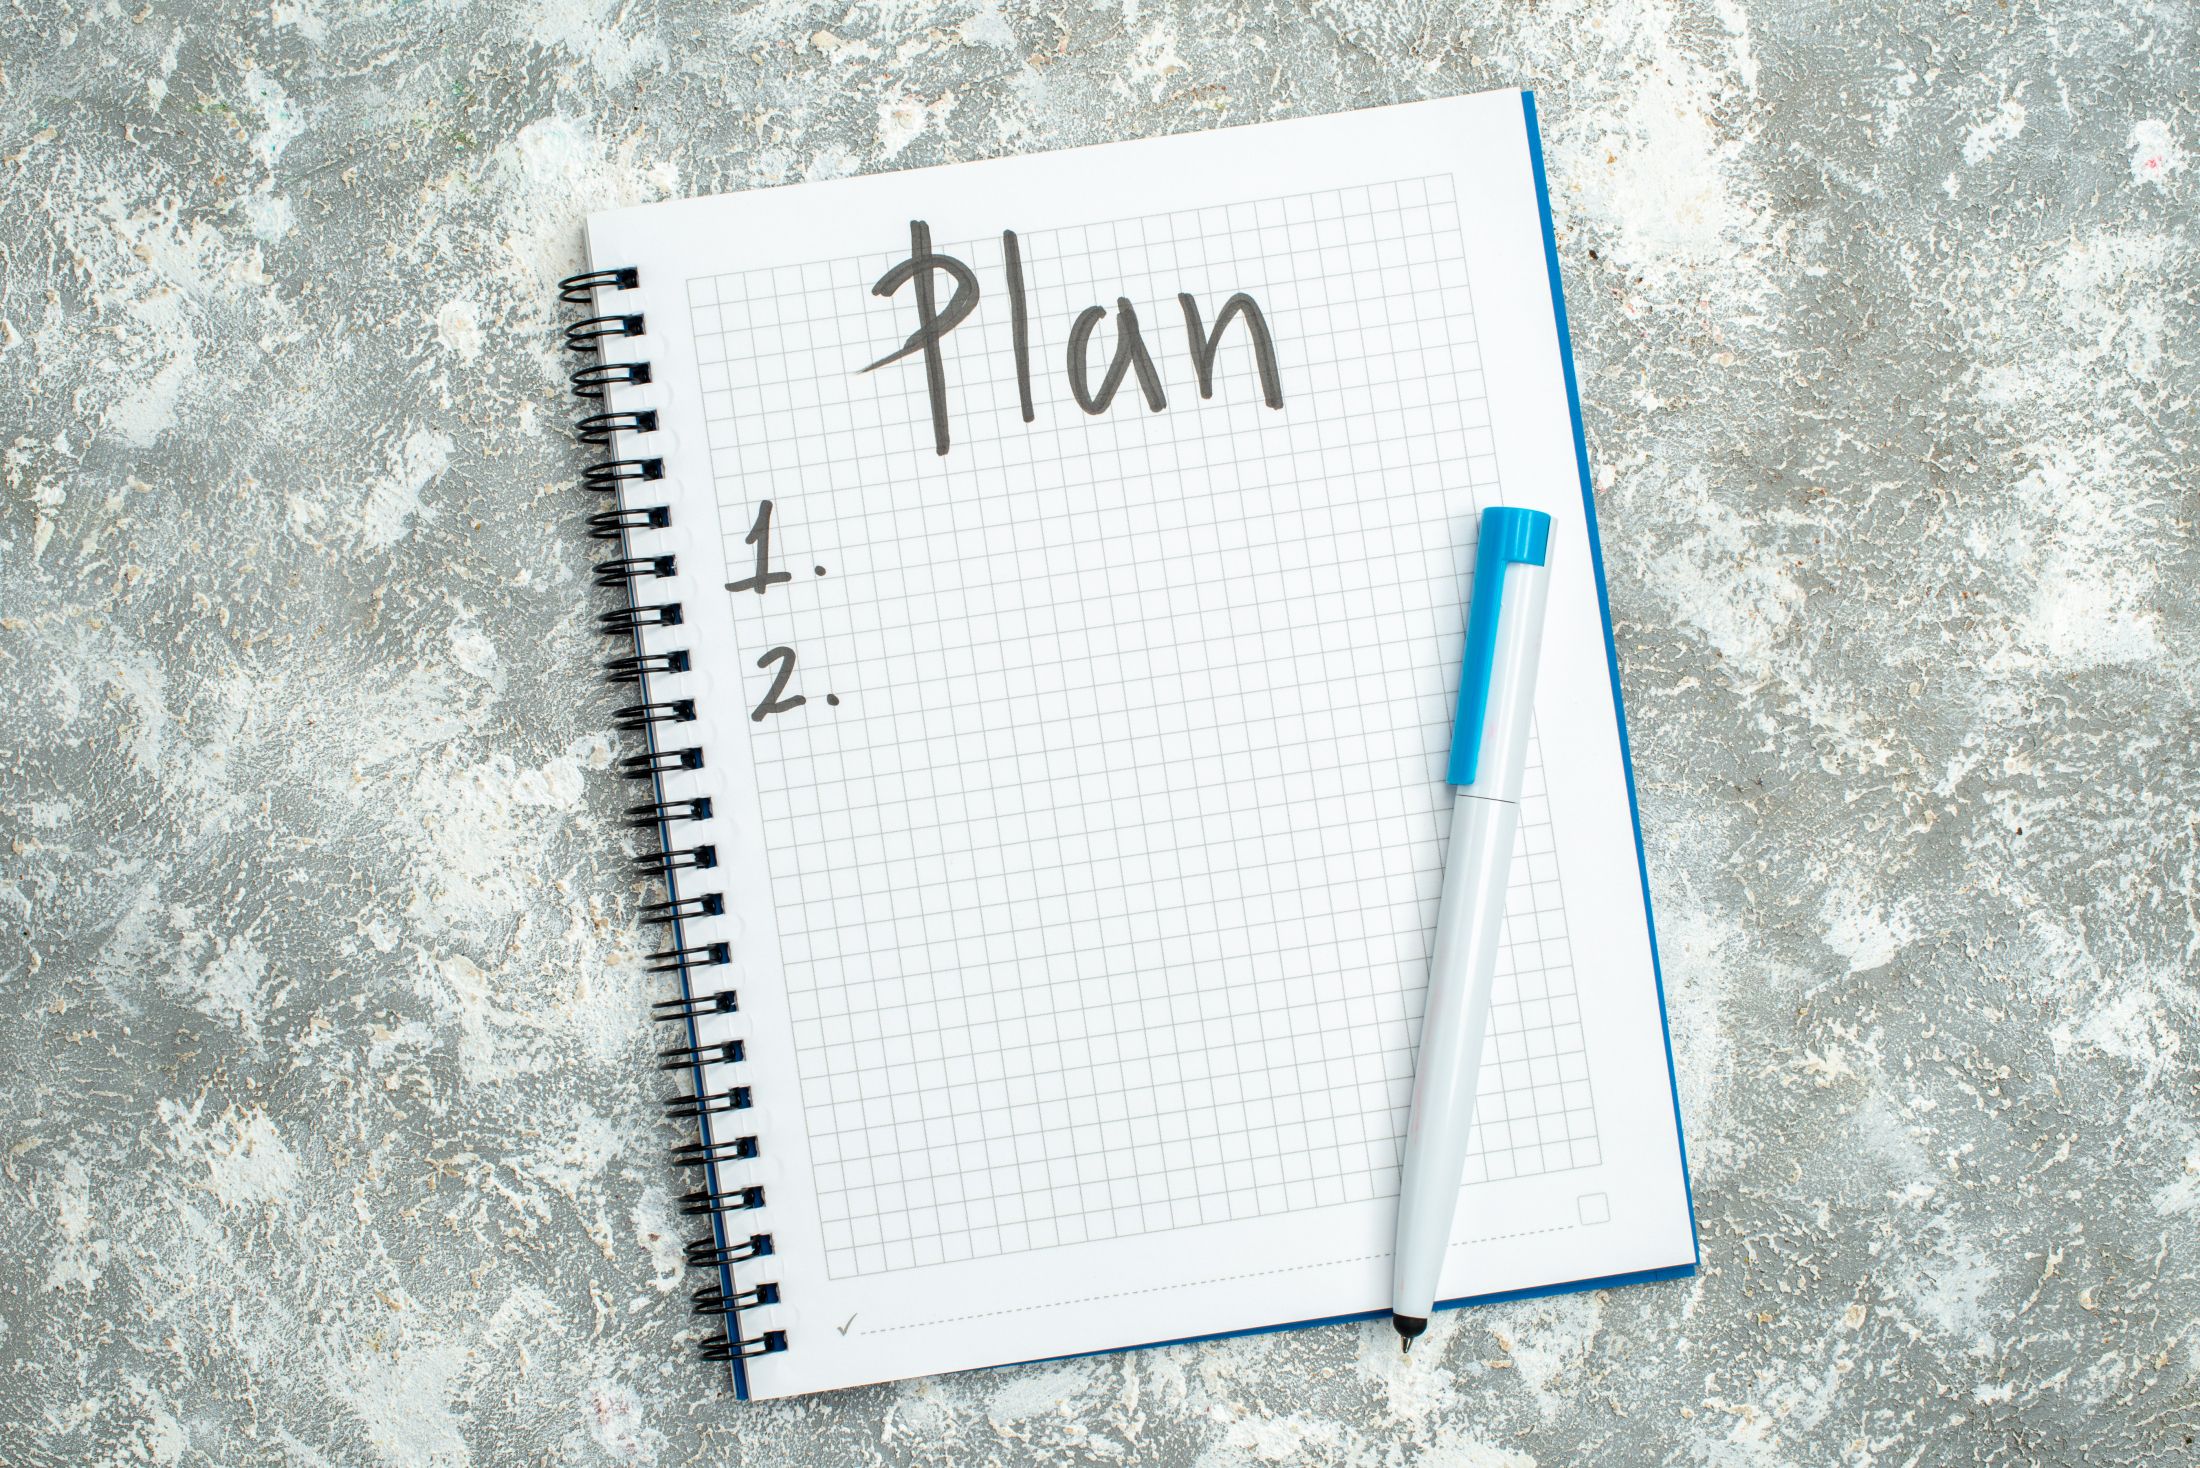 overhead-view-of-written-spiral-notebook-with-pen-on-gray-background.jpg